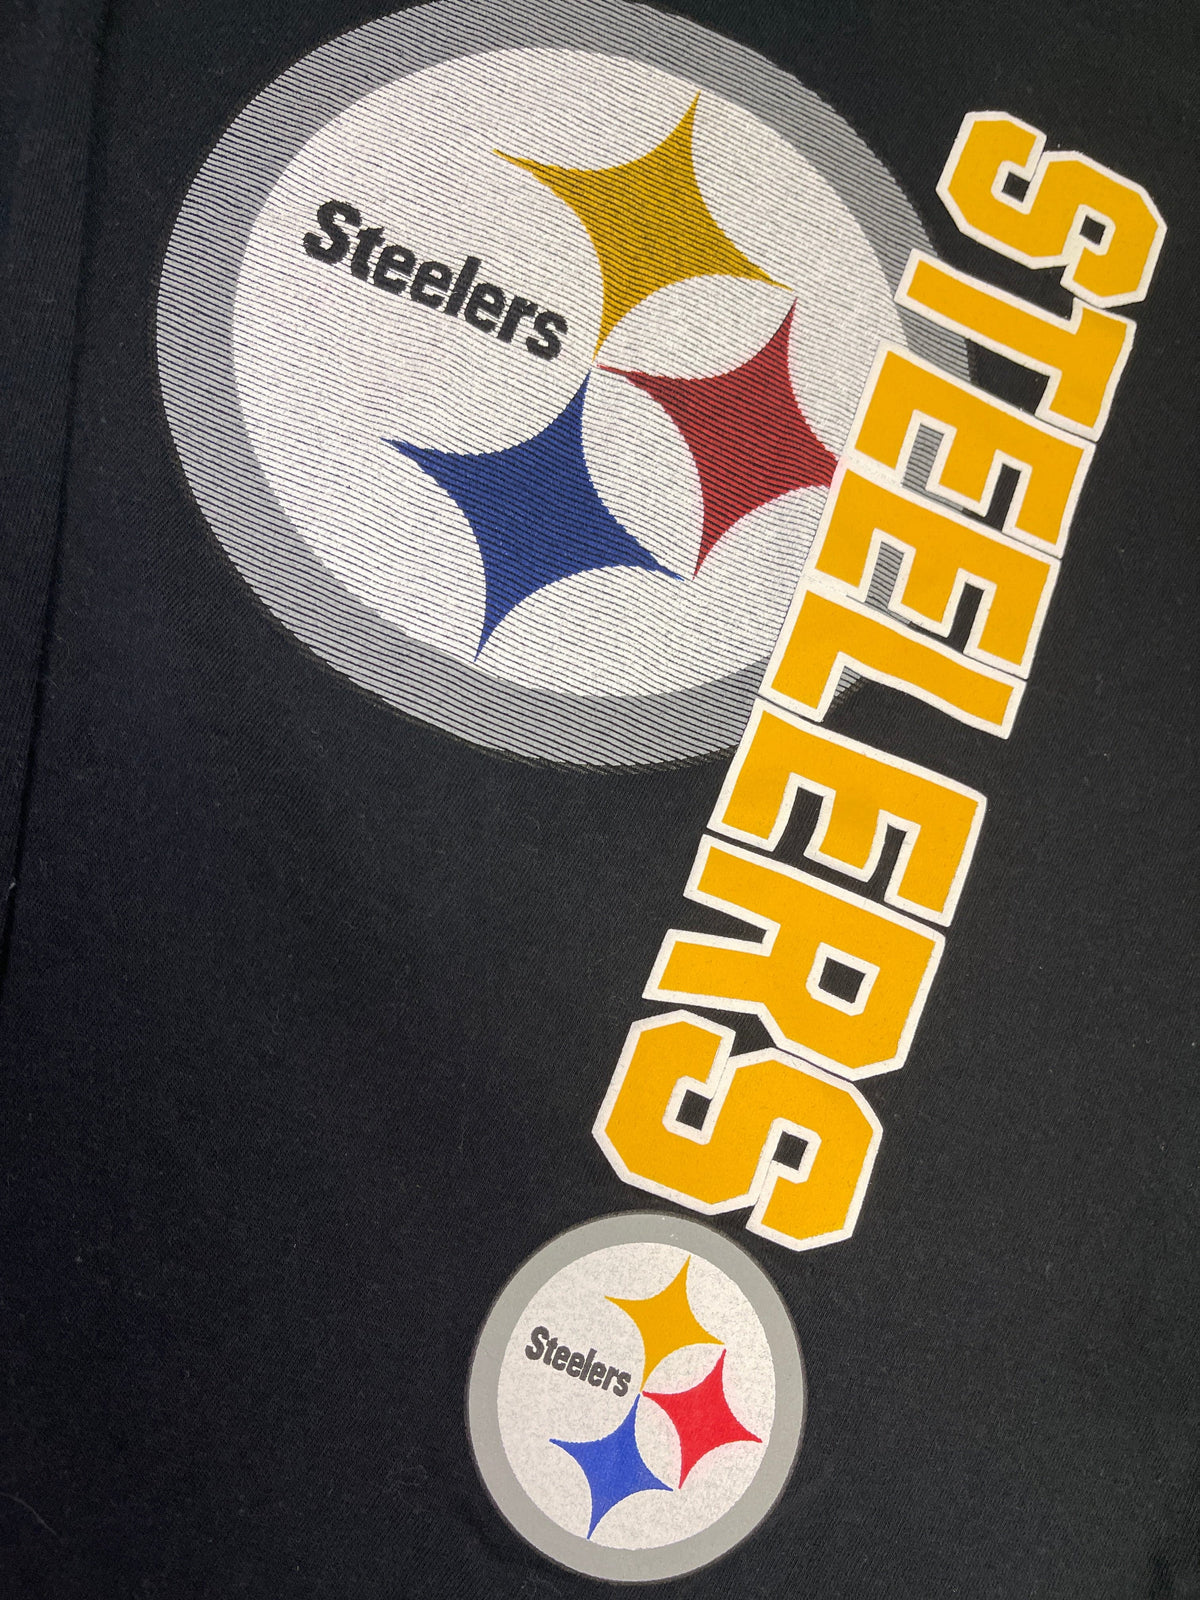 NFL Pittsburgh Steelers 100% Cotton L/S T-Shirt Youth Small 7